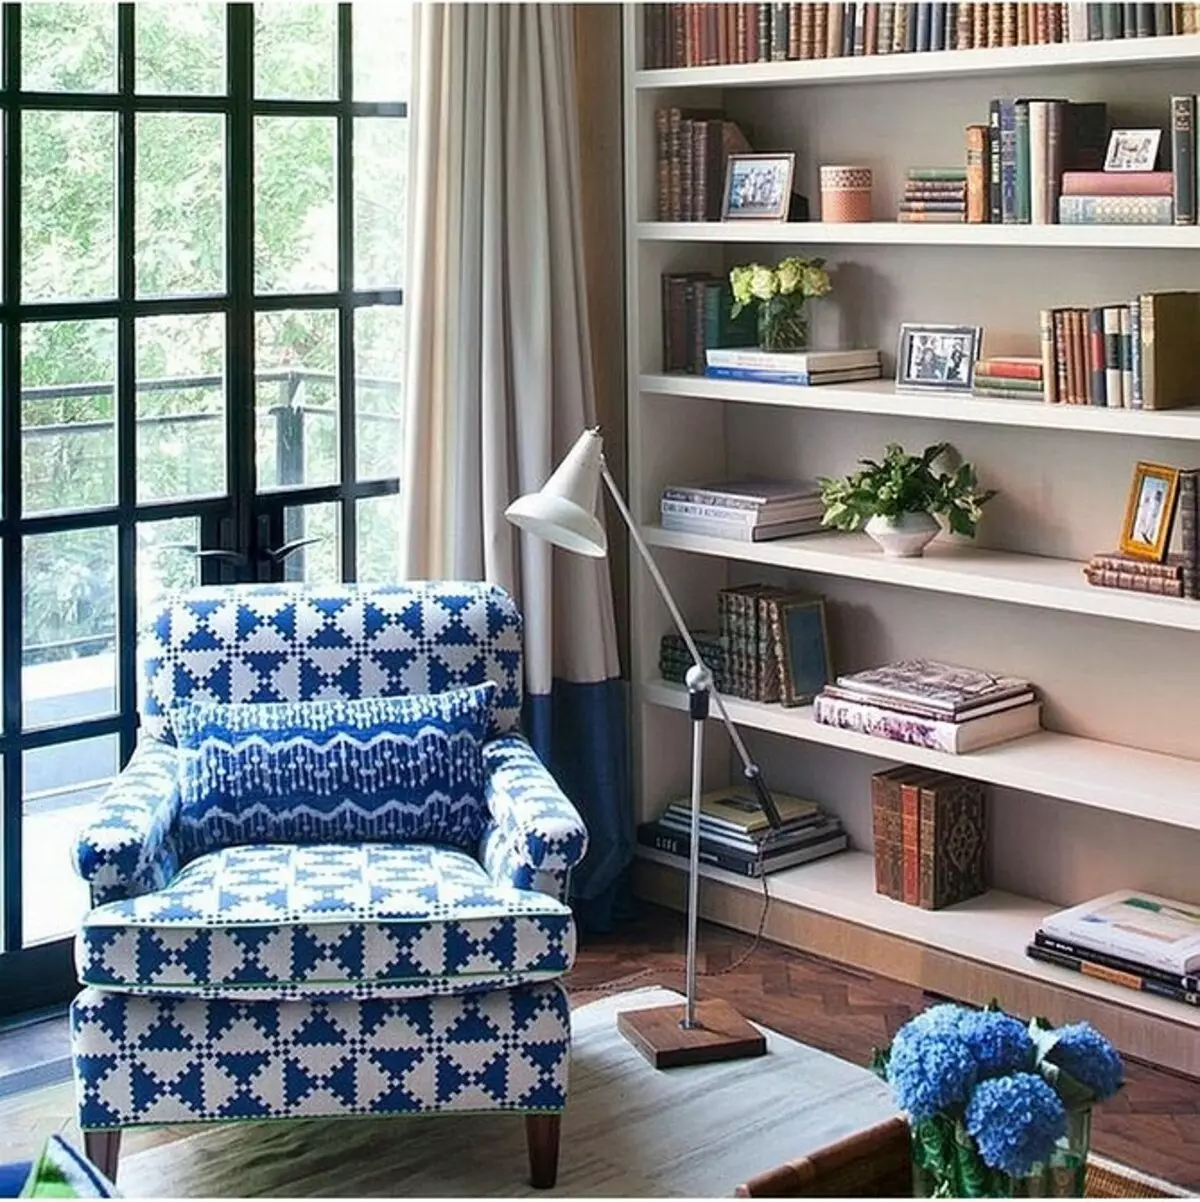 10 Interesting ways to equip a home library 8826_35